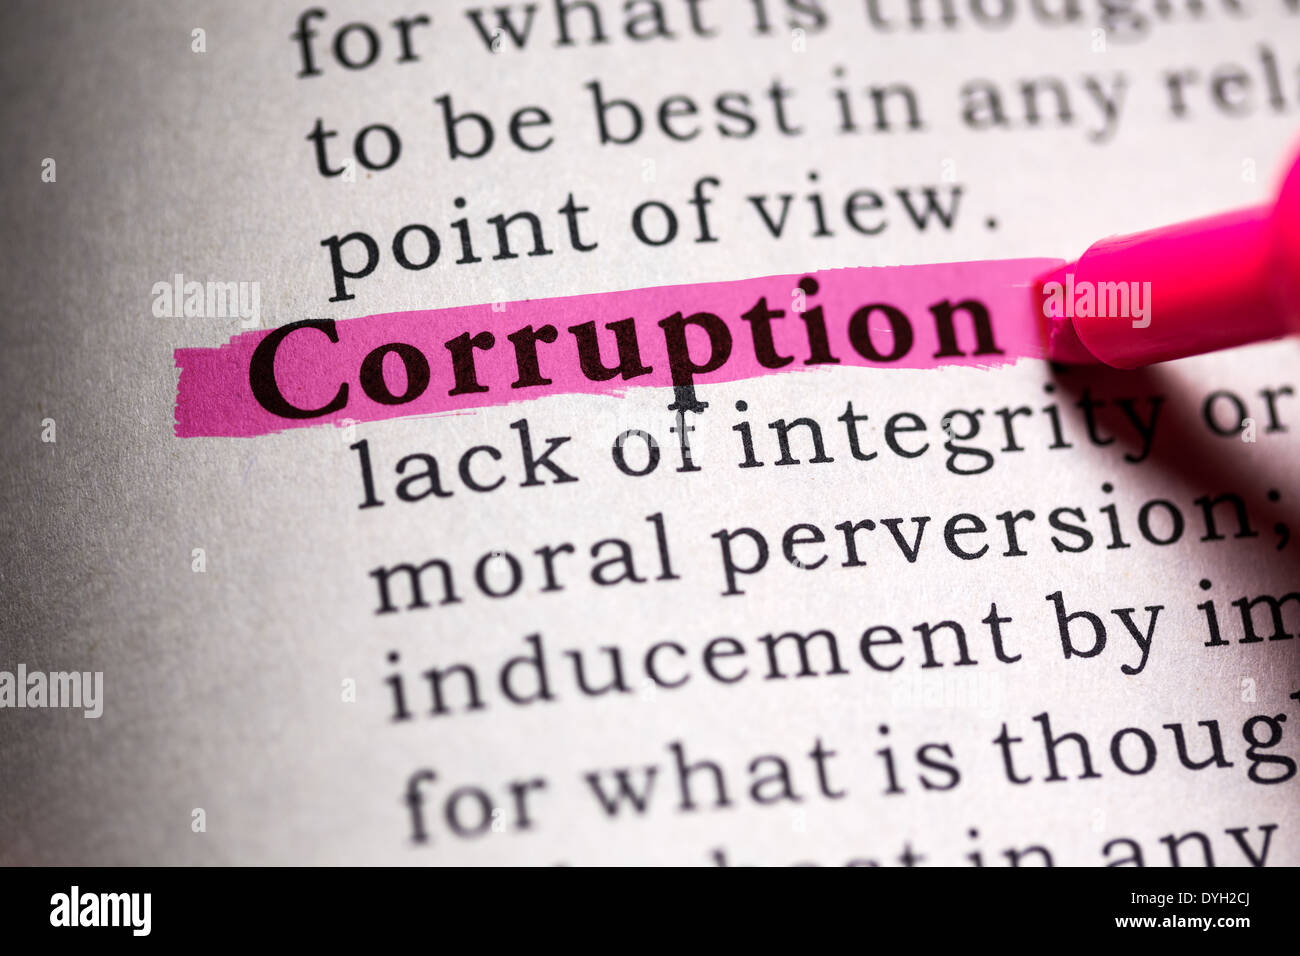 Fake Dictionary, Dictionary definition of the word corruption. Stock Photo